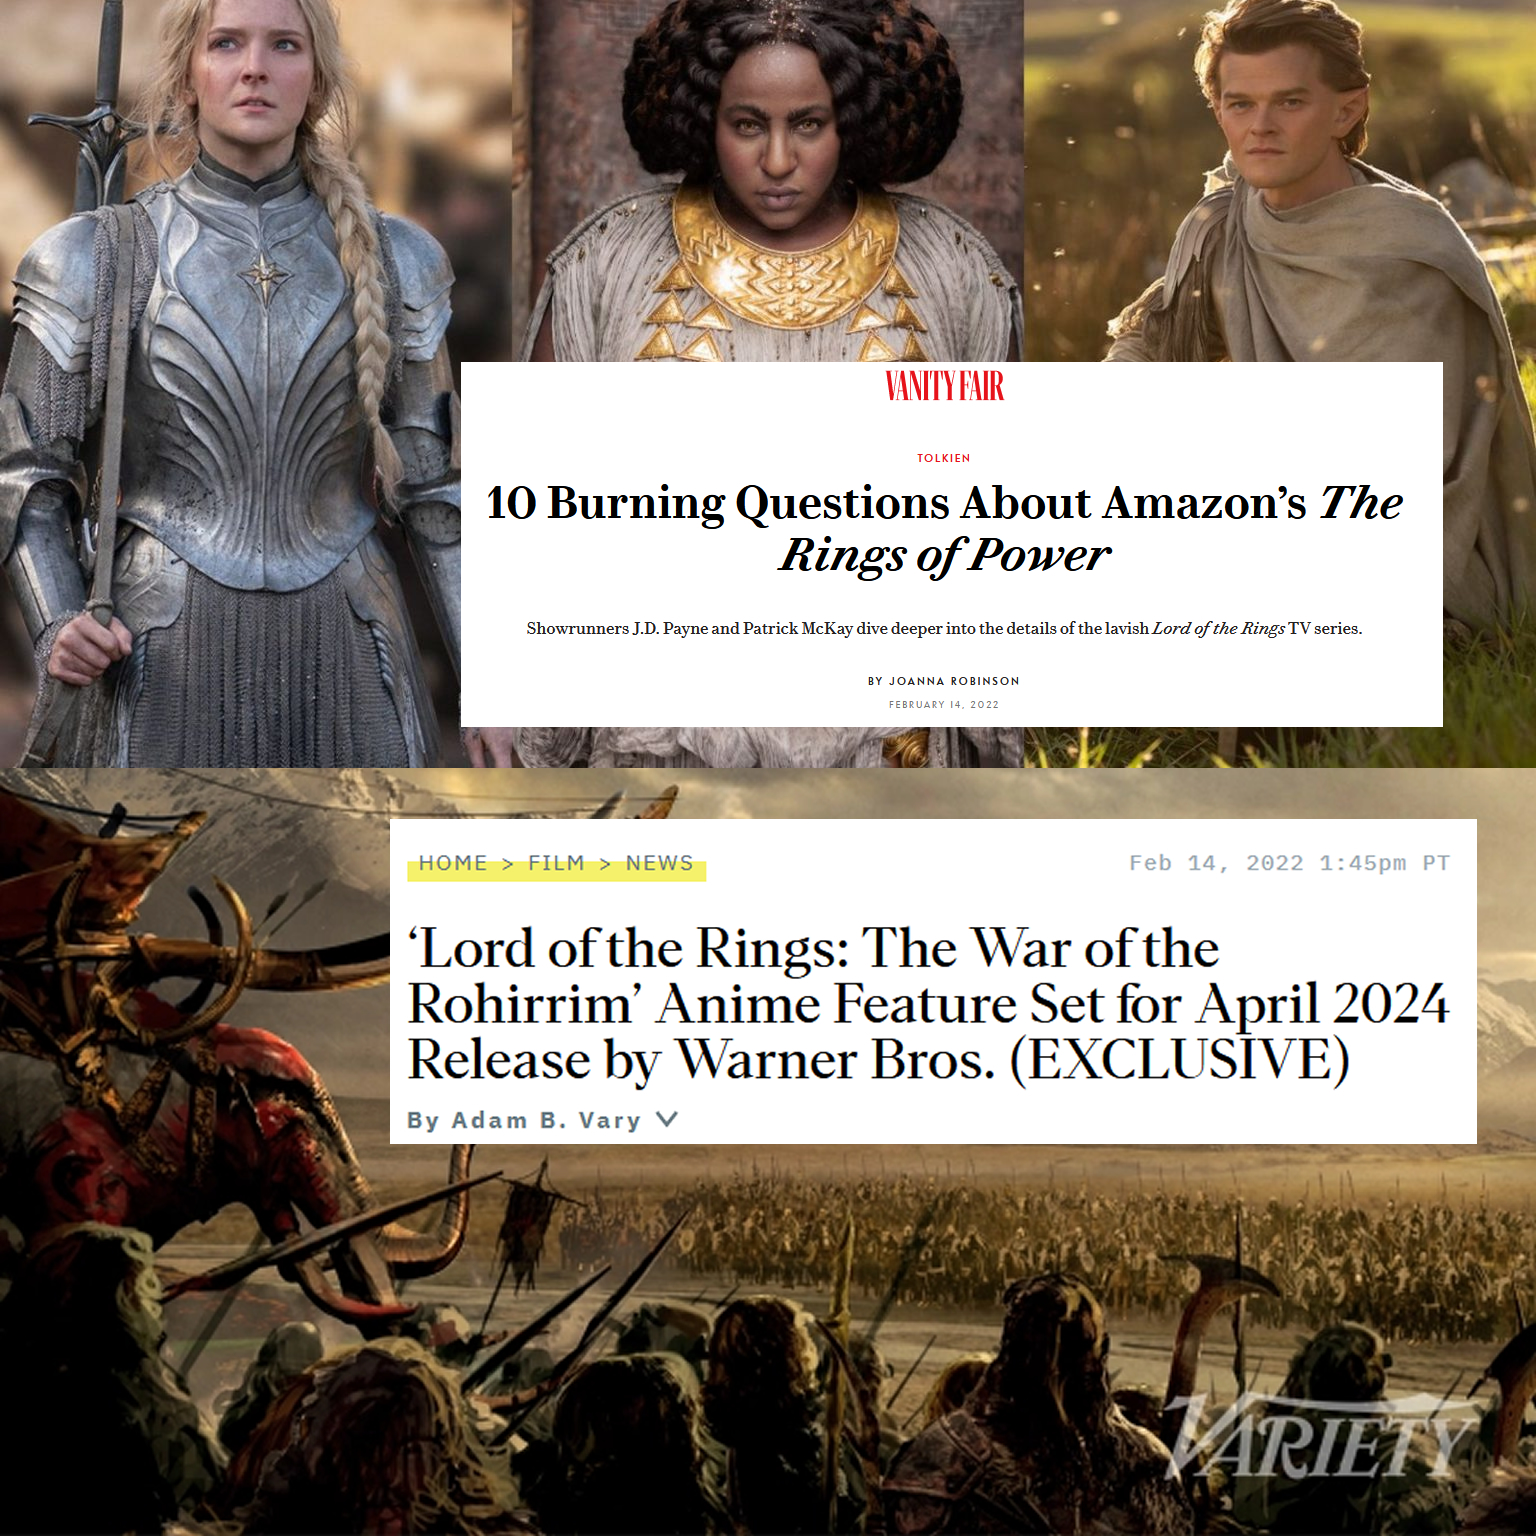 DiscussingFilm @DiscussingFilm An anime 'Lord of the Rings' film titled  'THE LORD OF THE RINGS: THE